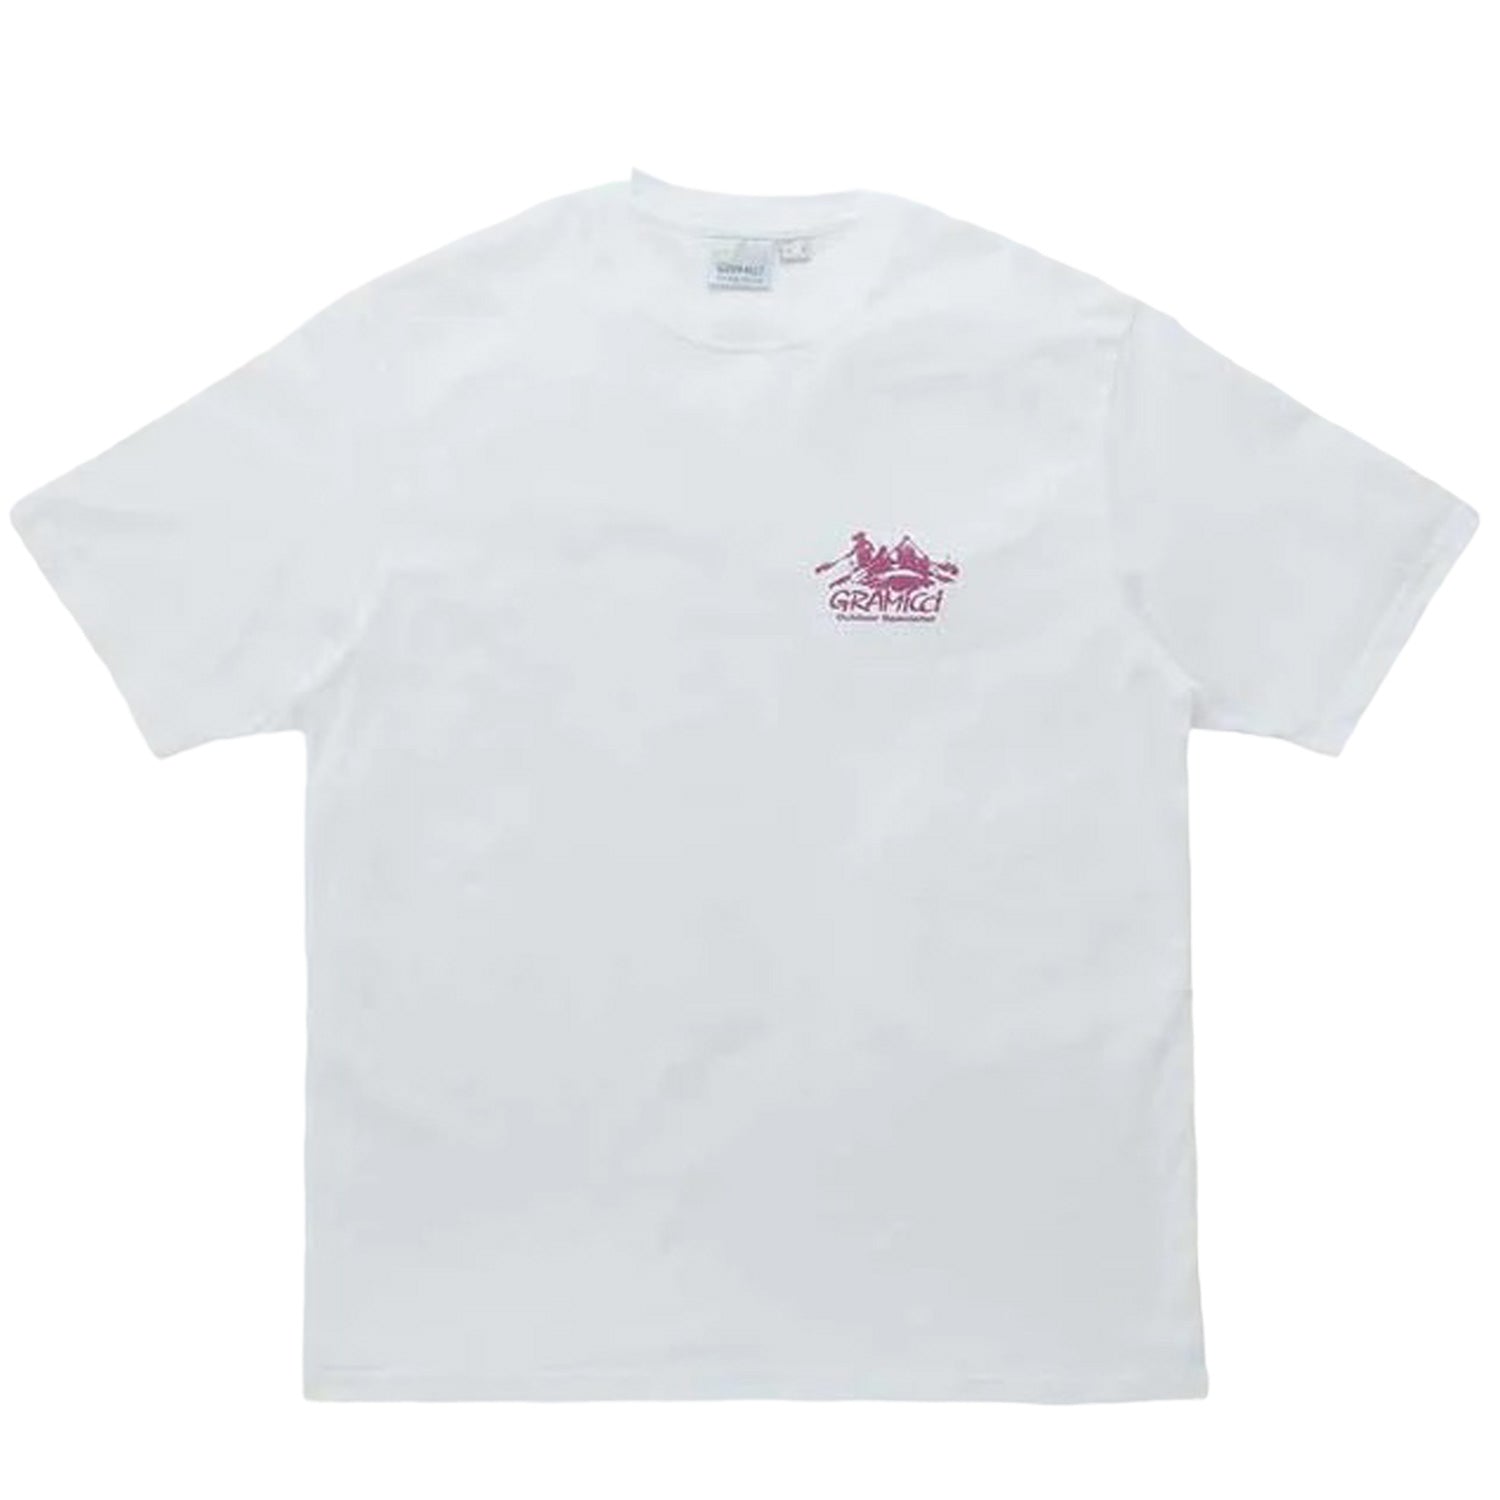 White Gramicci short sleeve t-shirt with printed logos in purple on front and back. Free UK Shipping on orders over £50